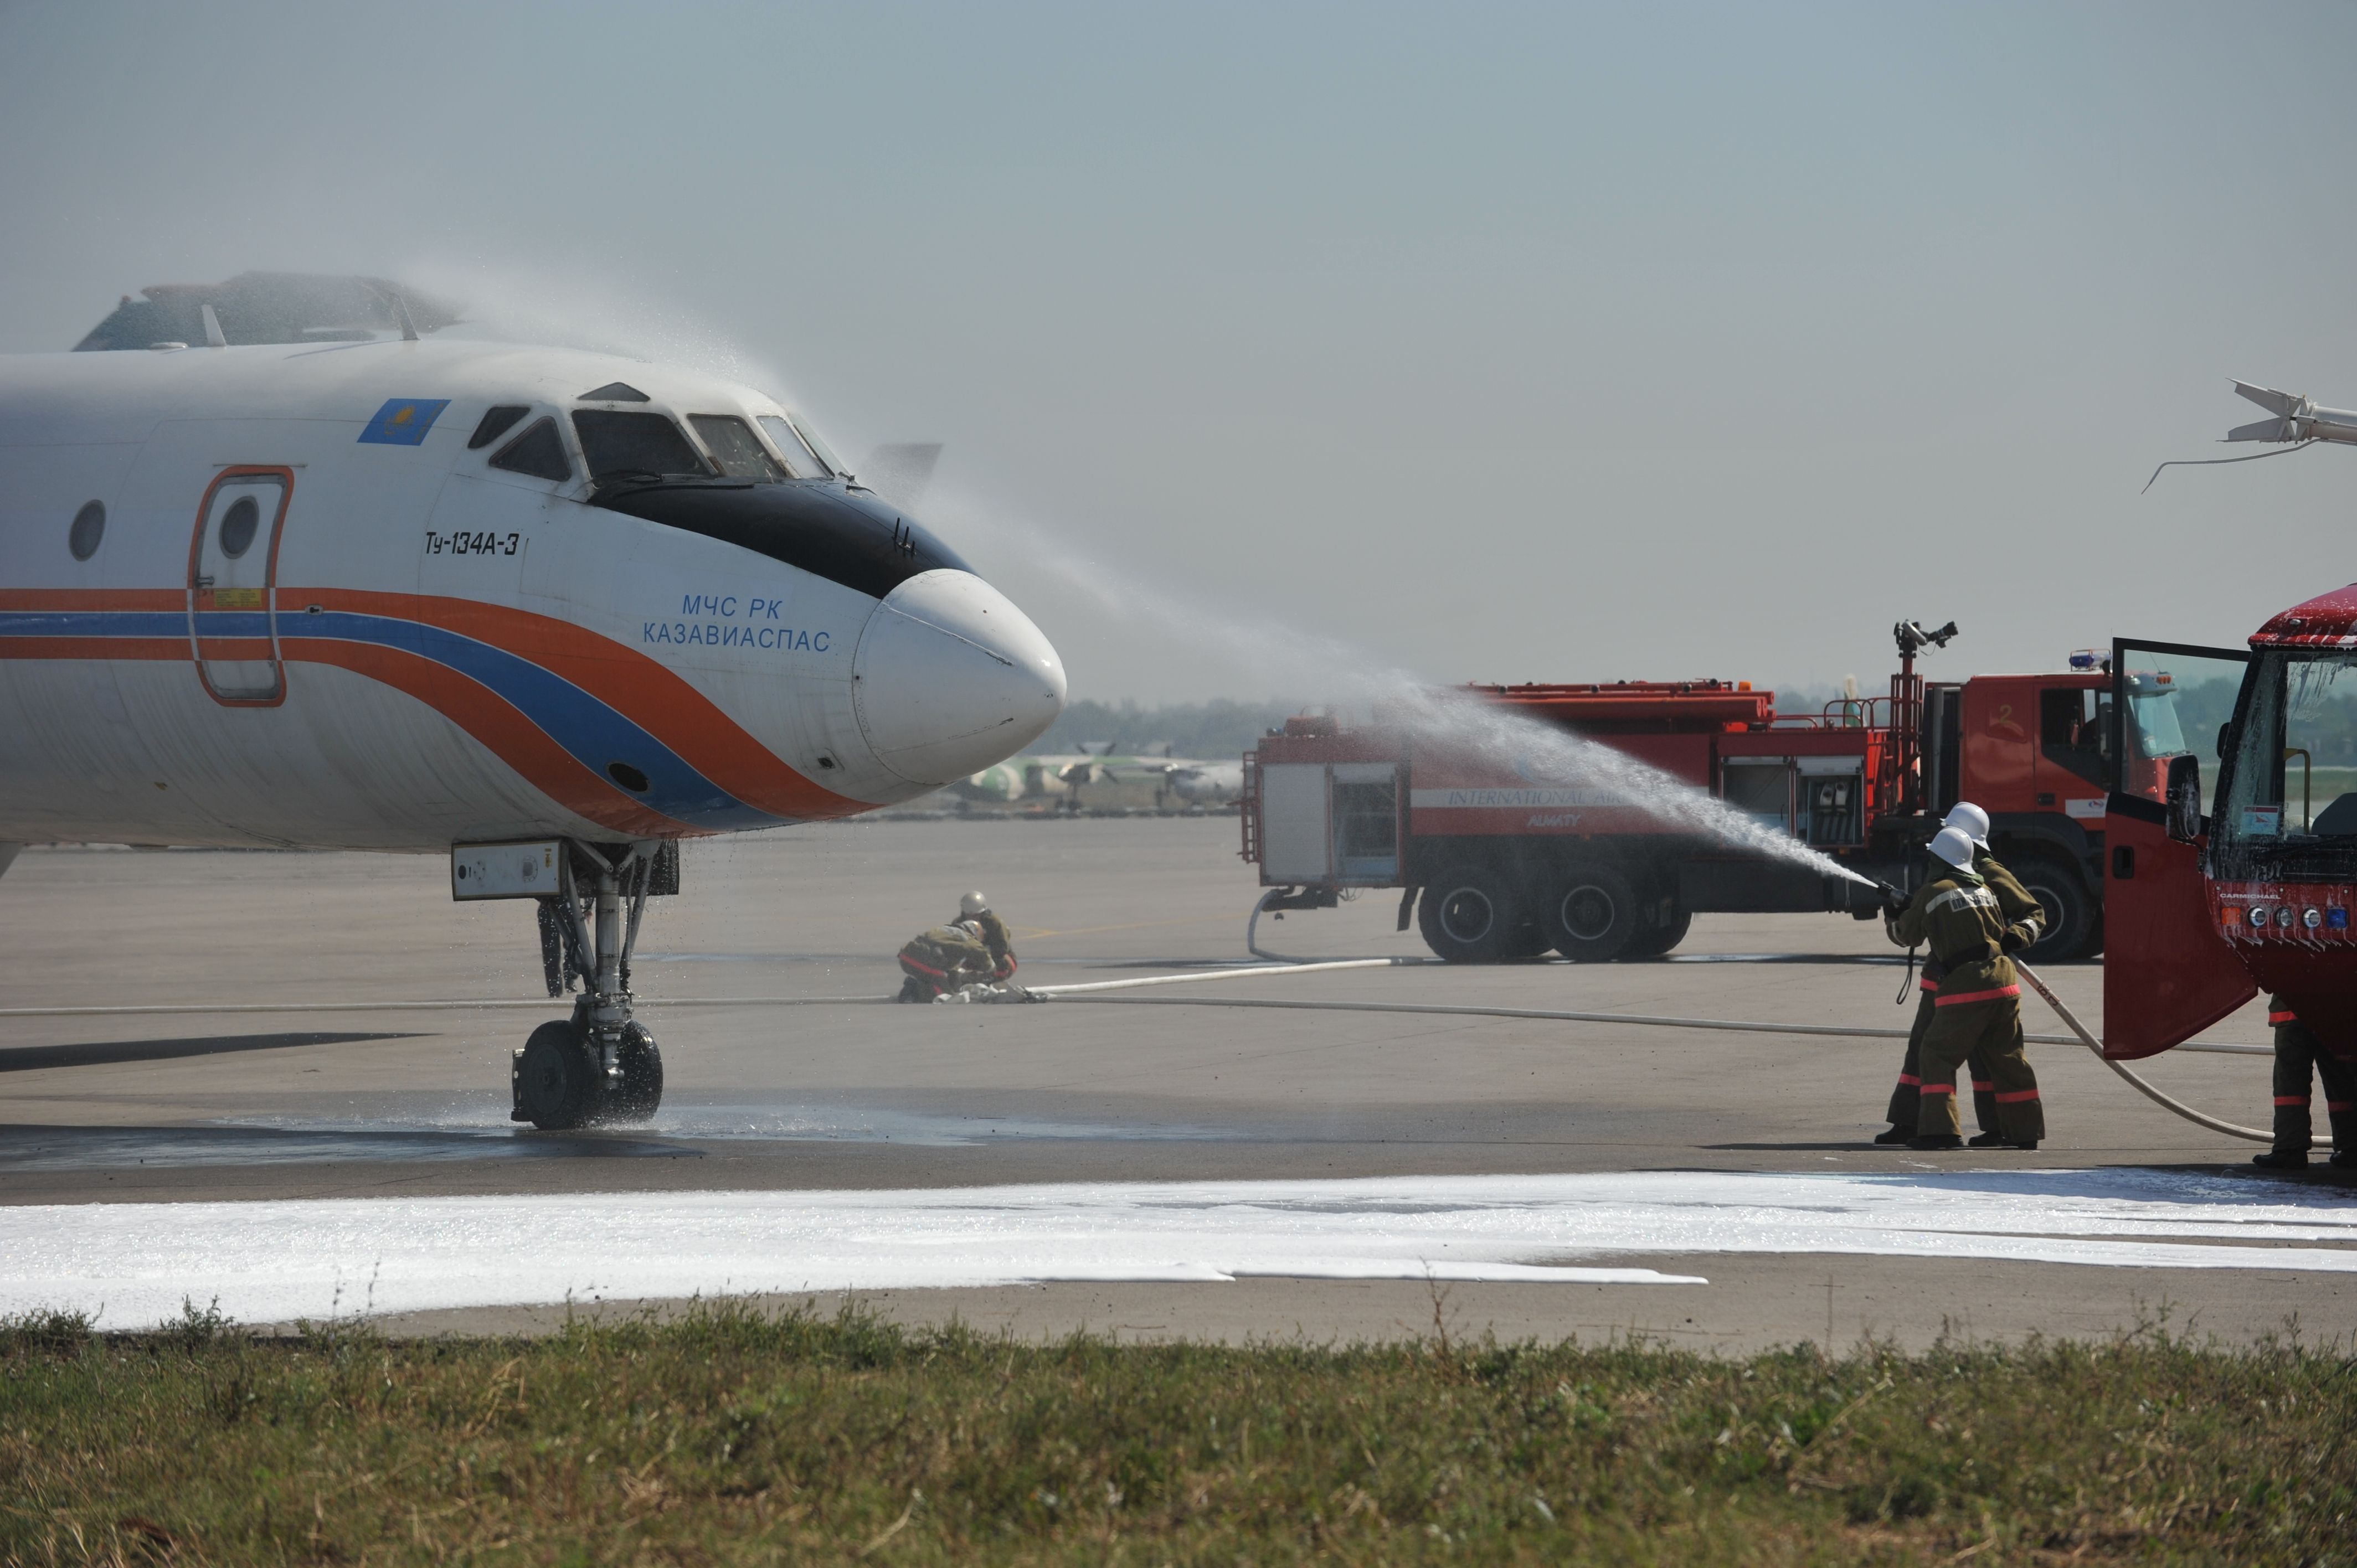 Firefighters Spraying An Aircraft's Nose With Water.